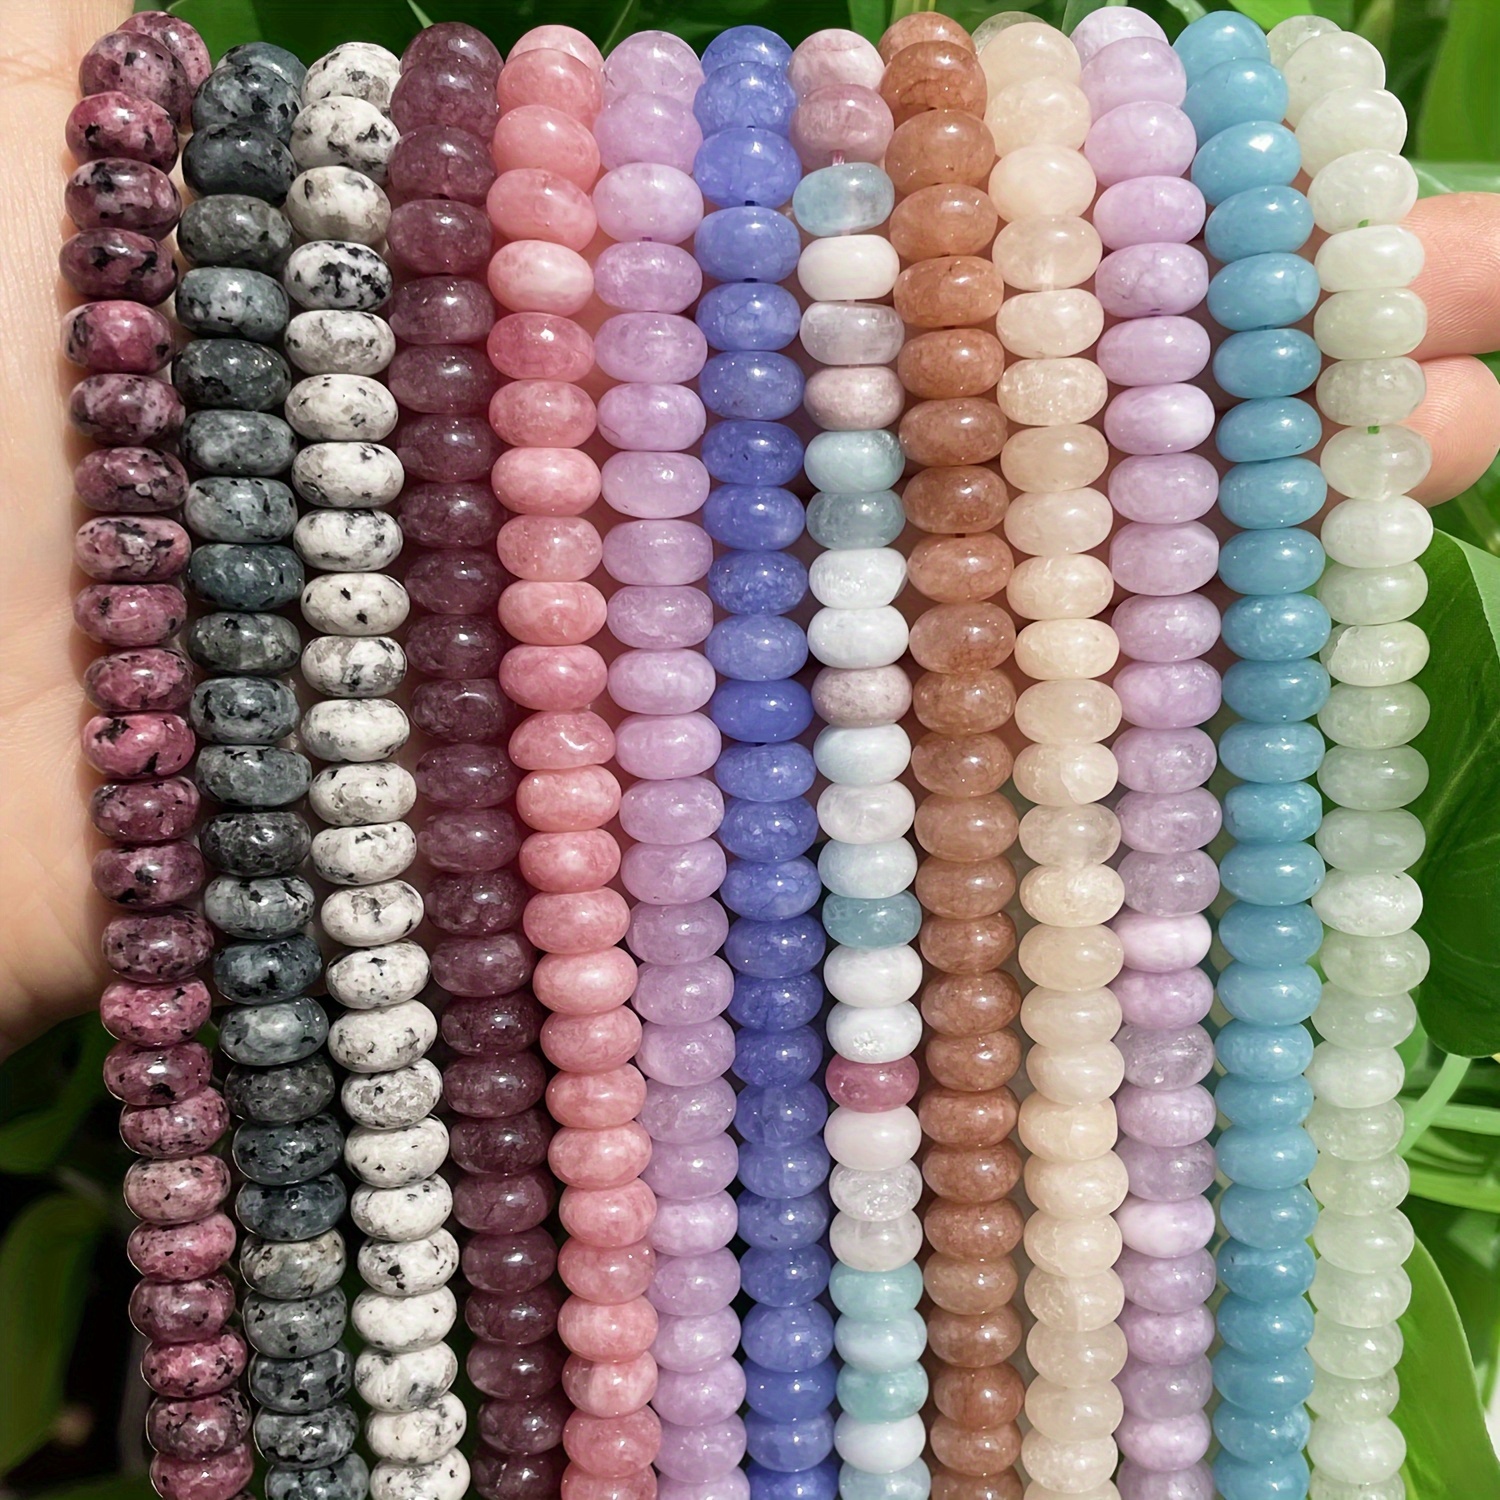 20Pcs Silicone Beads Rainbow Silicone Beads Bulk Hot Air Balloon Silicone  Loose Spacer Beads Charm Color Silicone Bead Kit for Necklace Bracelet